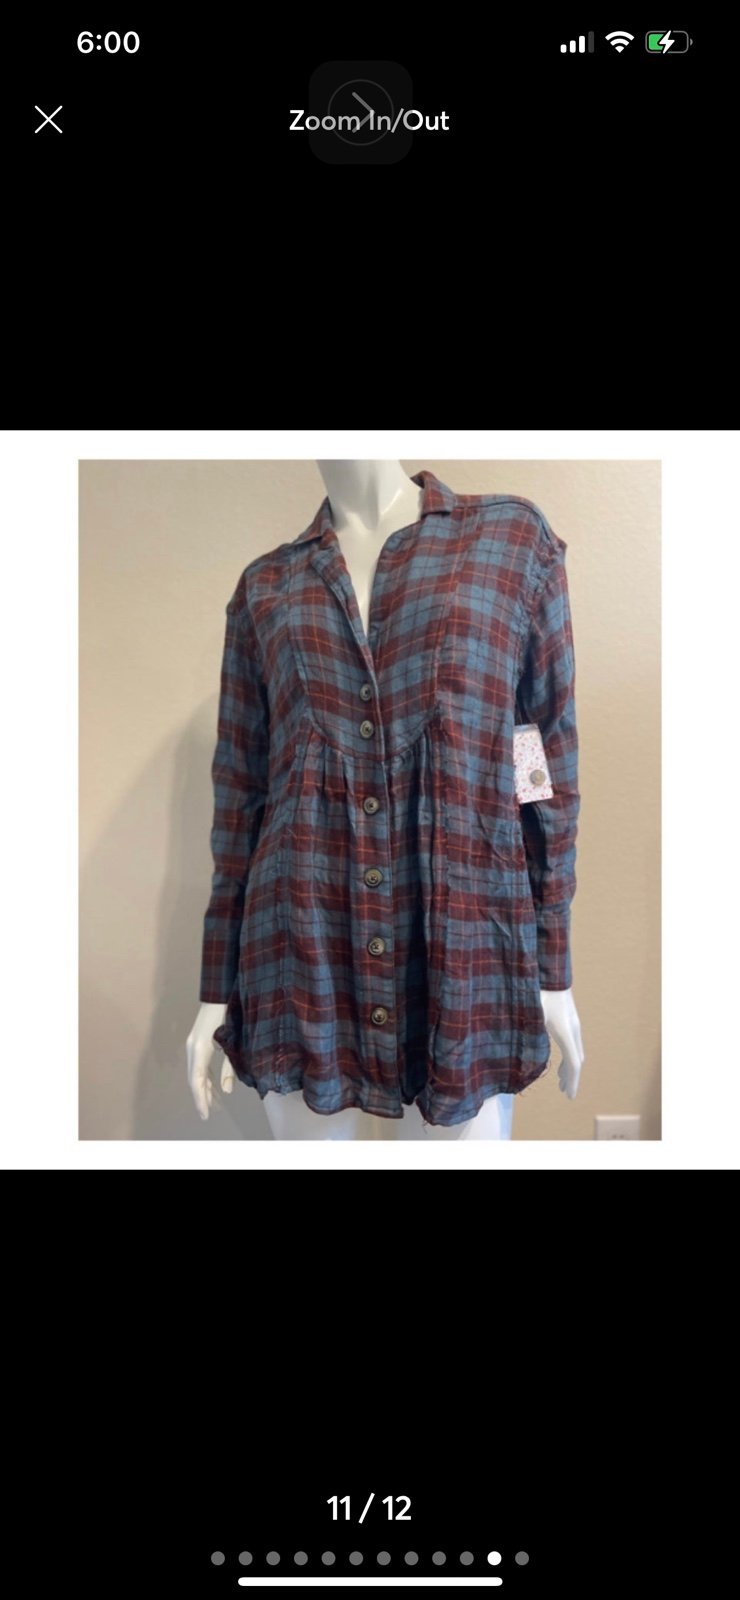 Custom Free People ALL ABOUT THE FEELS PLAID BUTTON DOWN TOP SMALL NEW oLHzR9P9c Discount